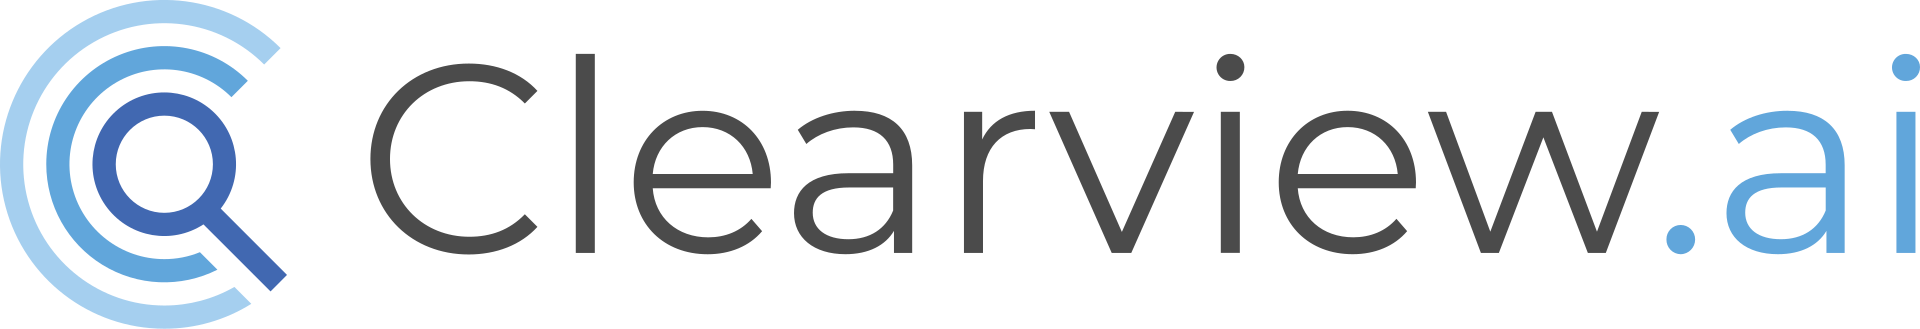 Clearview AI logo.svg